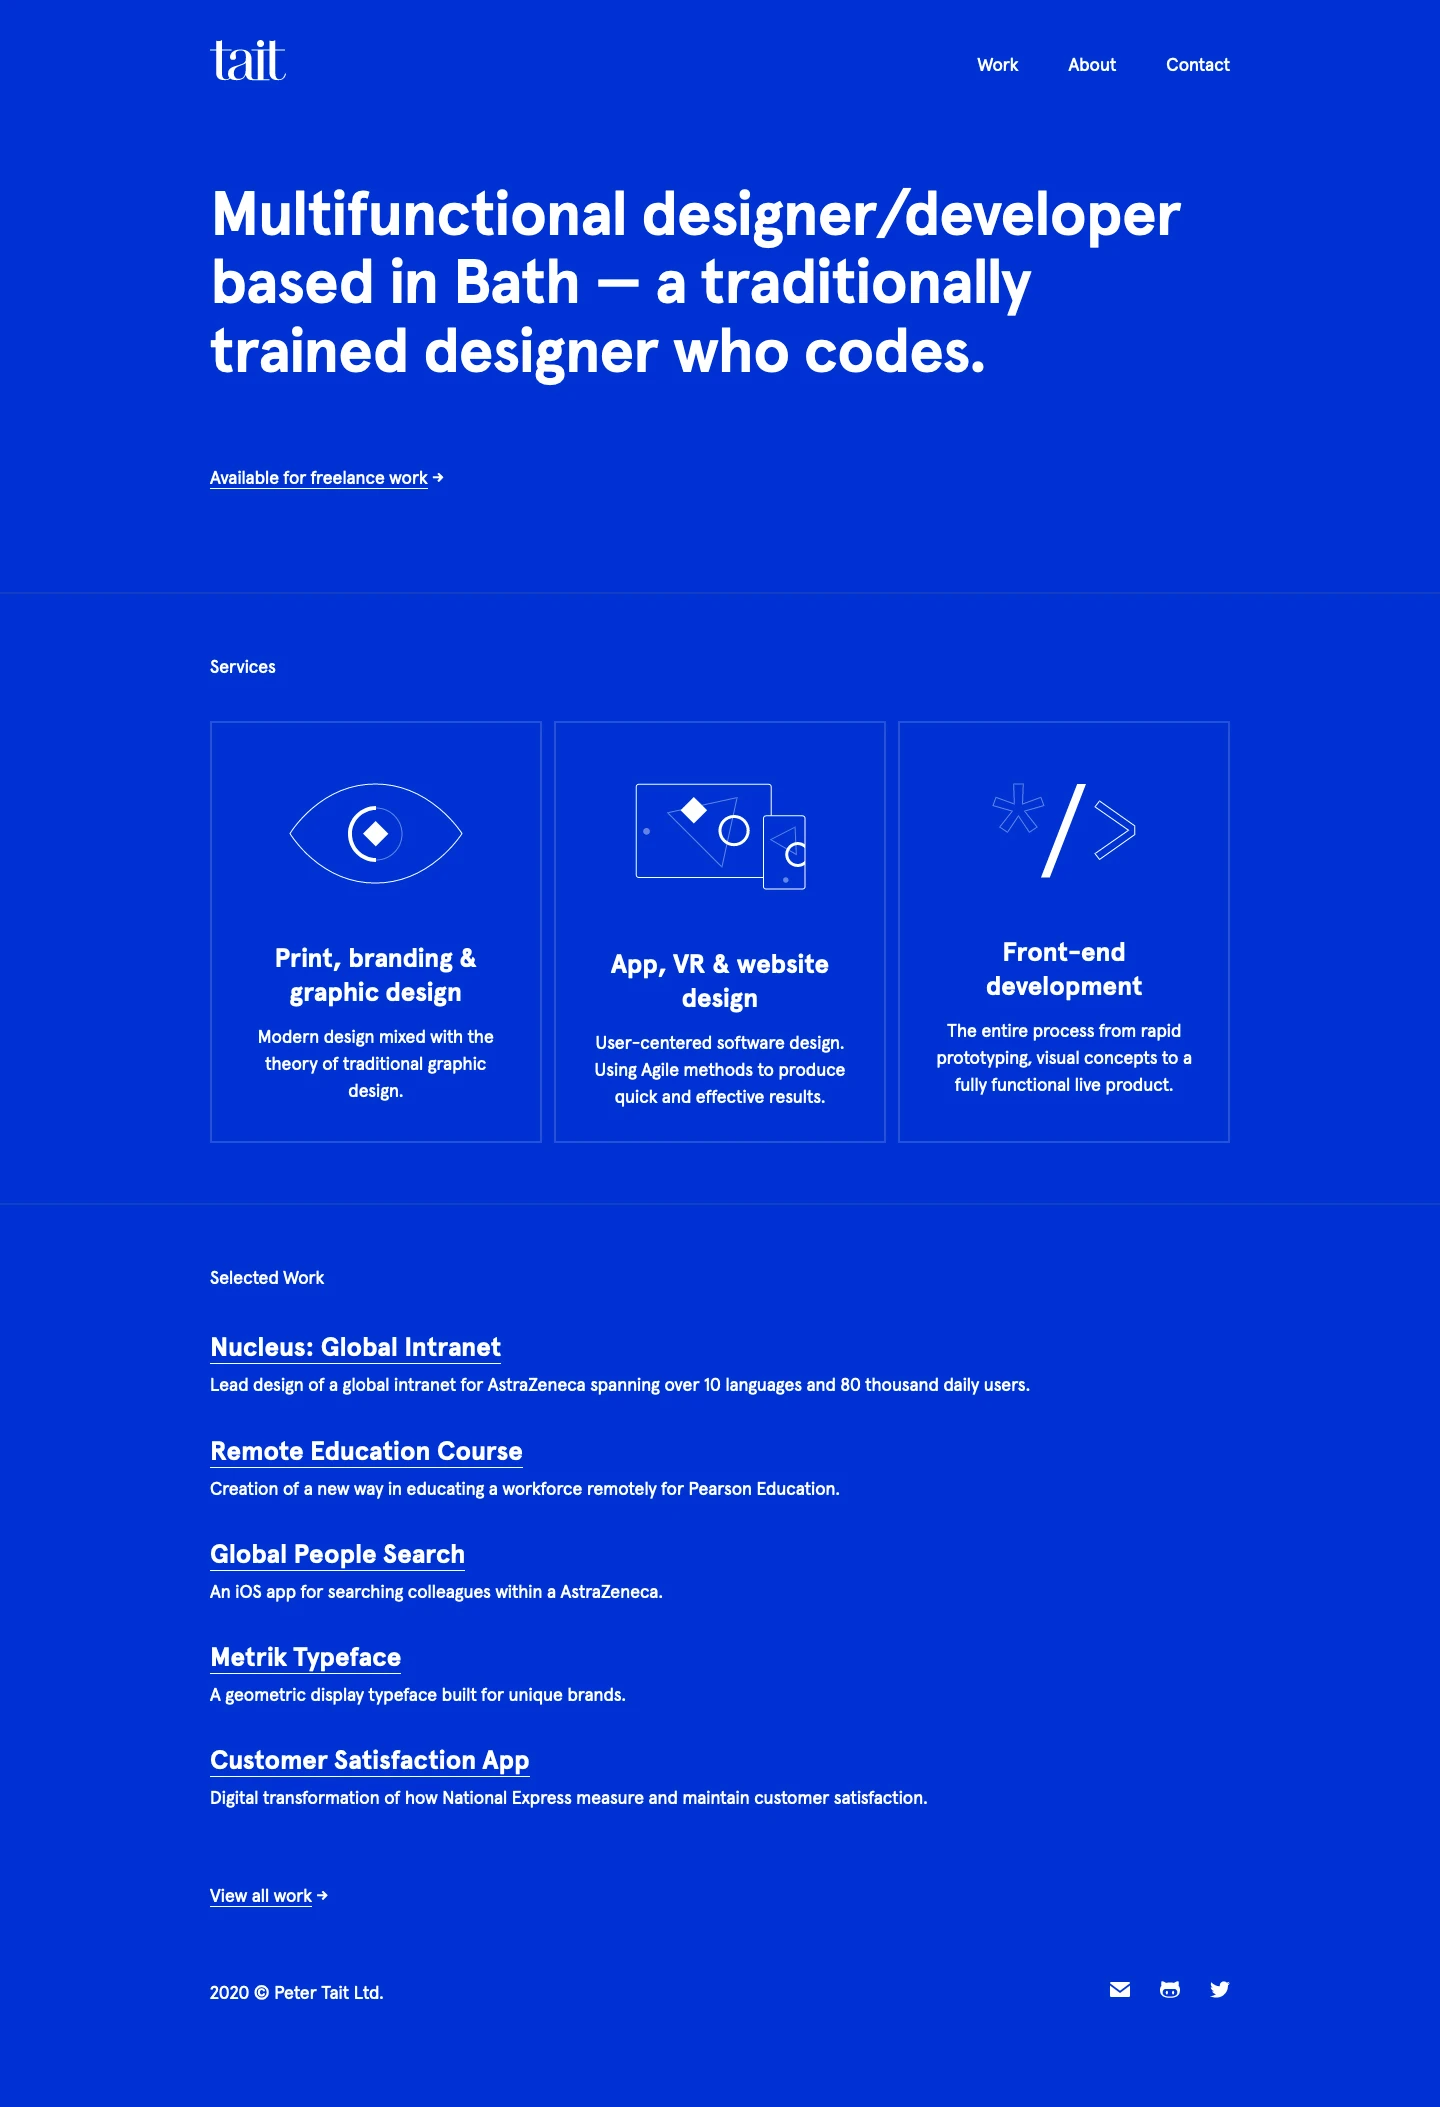 Peter Tait Landing Page Example: Multifunctional designer/developer based in Bath — a traditionally trained designer who codes.